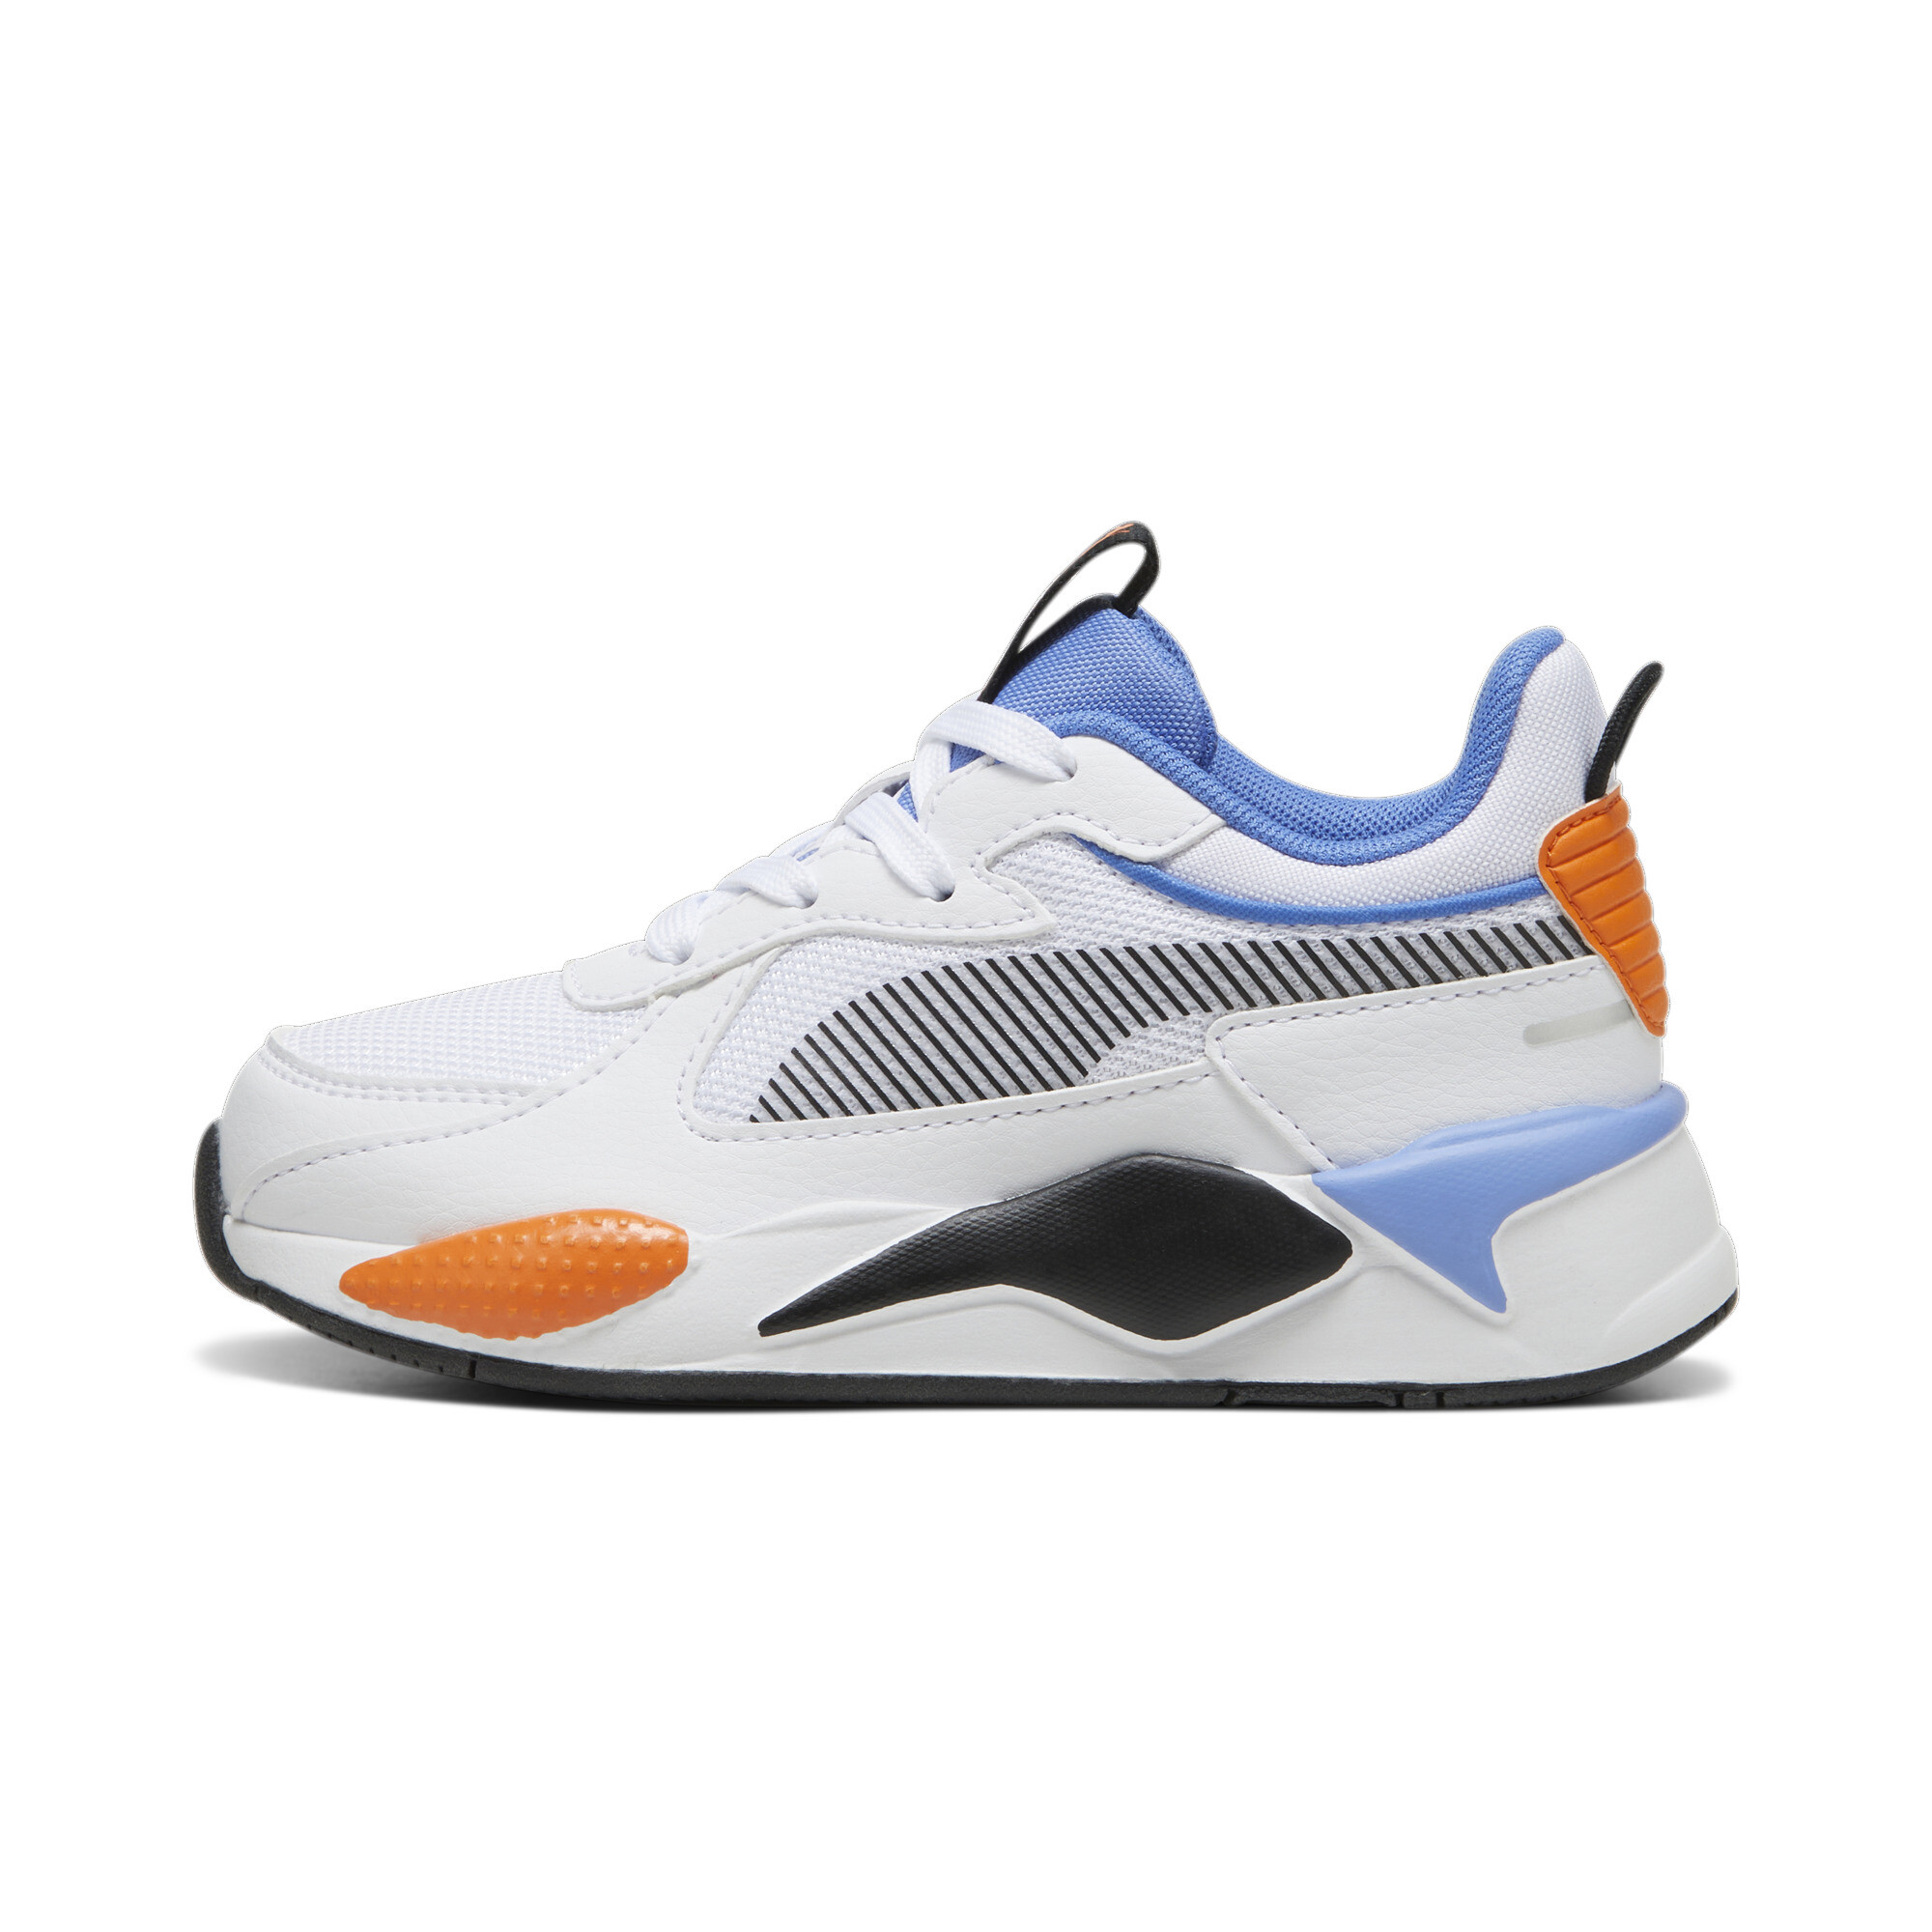 Puma RS-X Kids' Sneakers, White, Size 30, Shoes